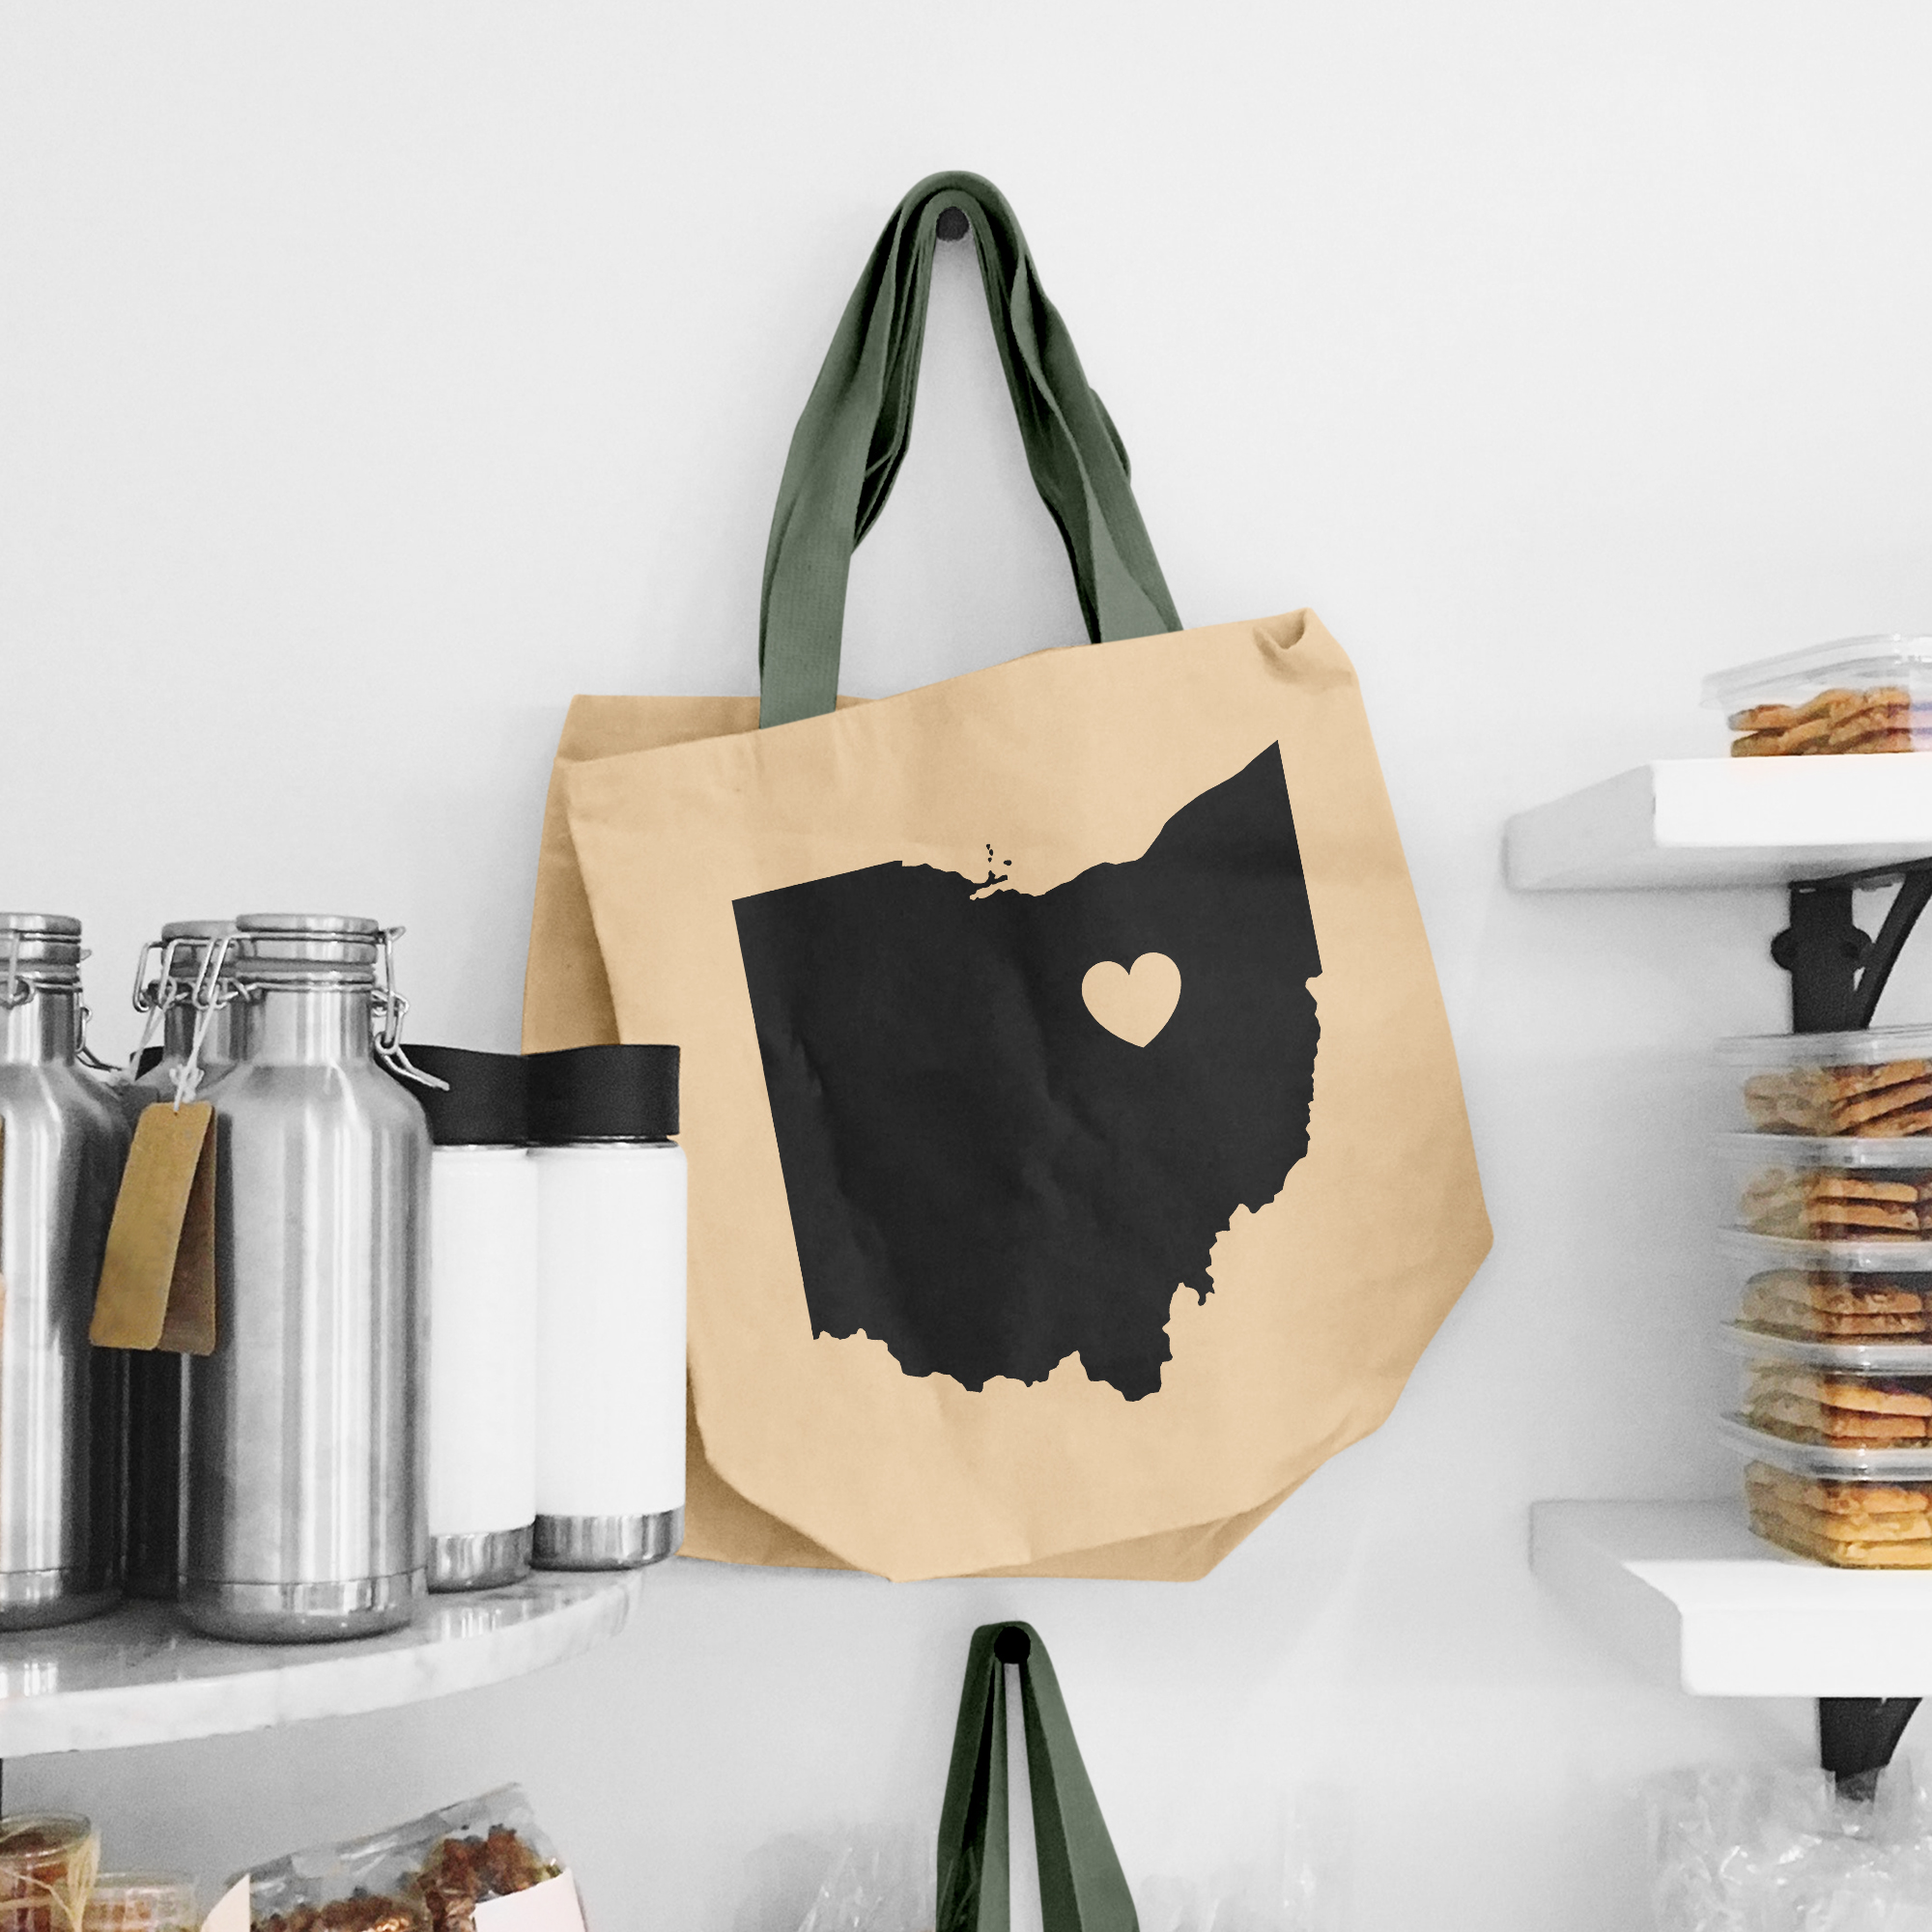 Black illustration of map of Ohio on the beige shopping bag with dirty green handle.